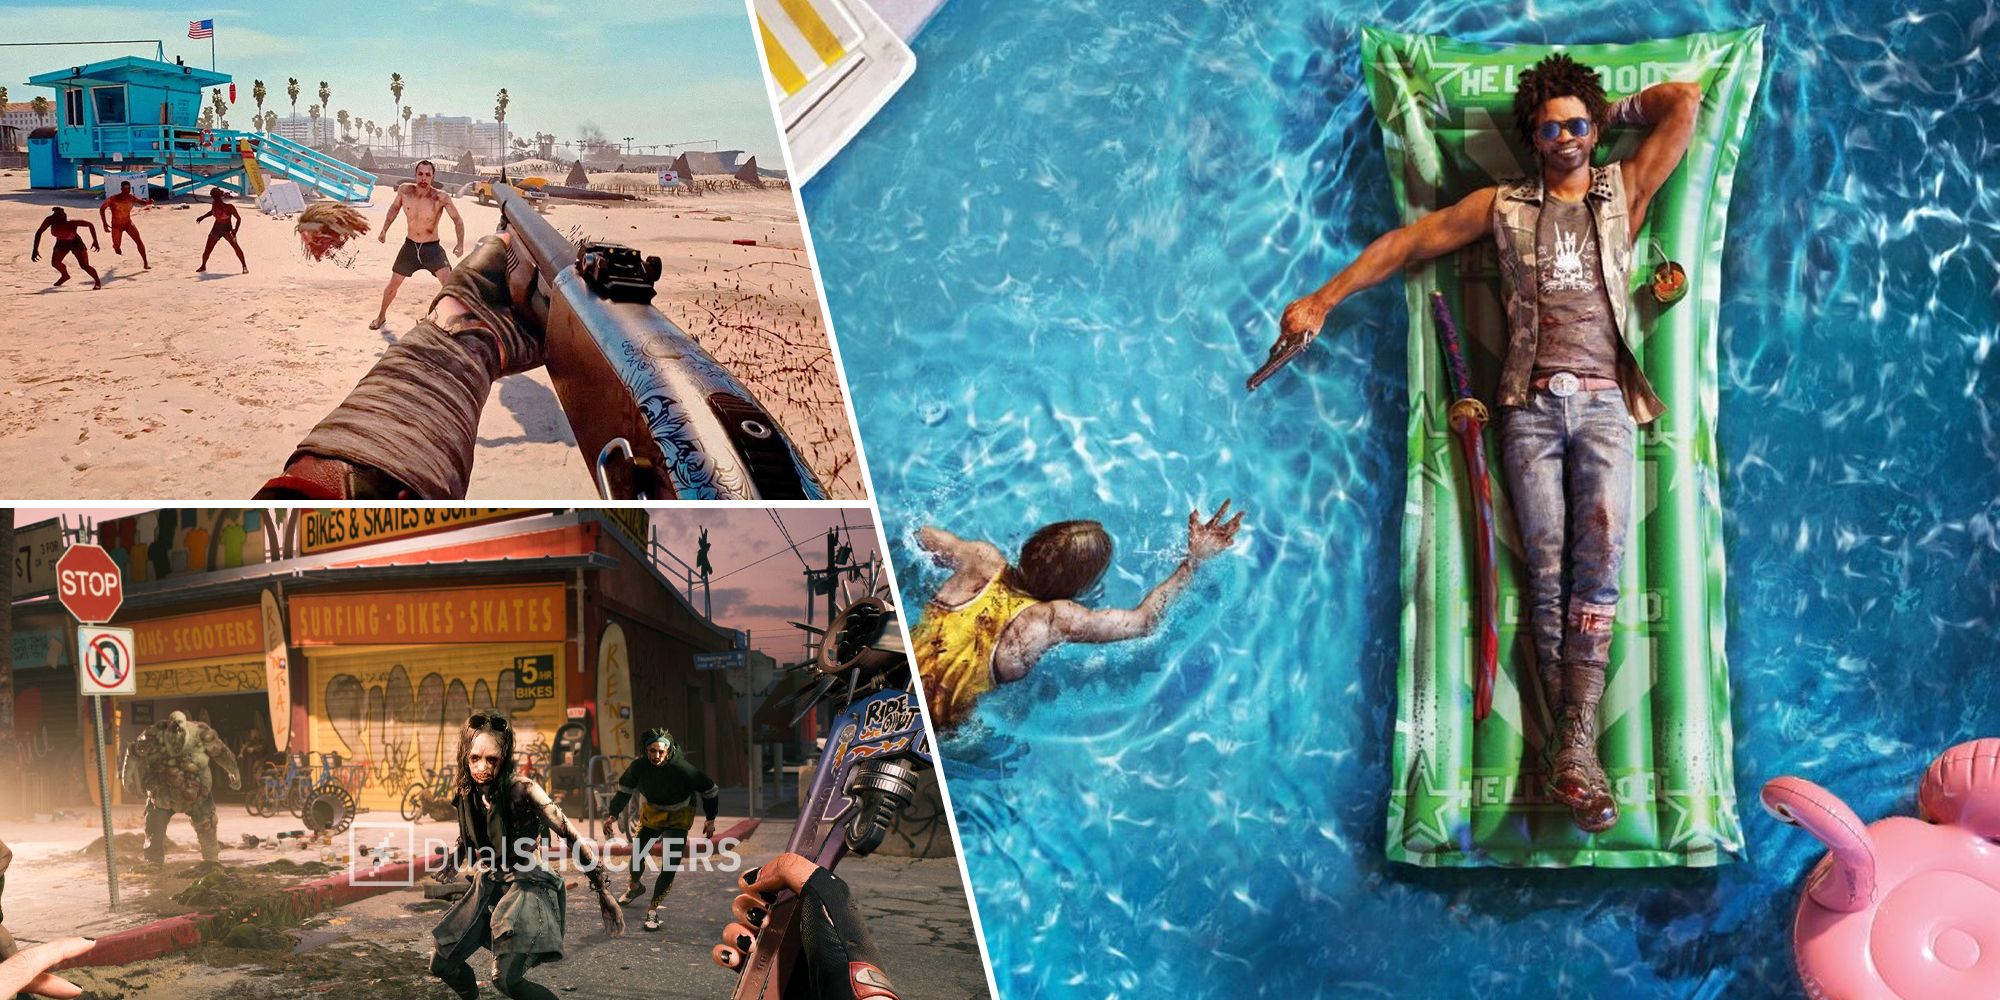 Dead Island 2' Opening Hours Review - See How It Compares To 'Dead Island